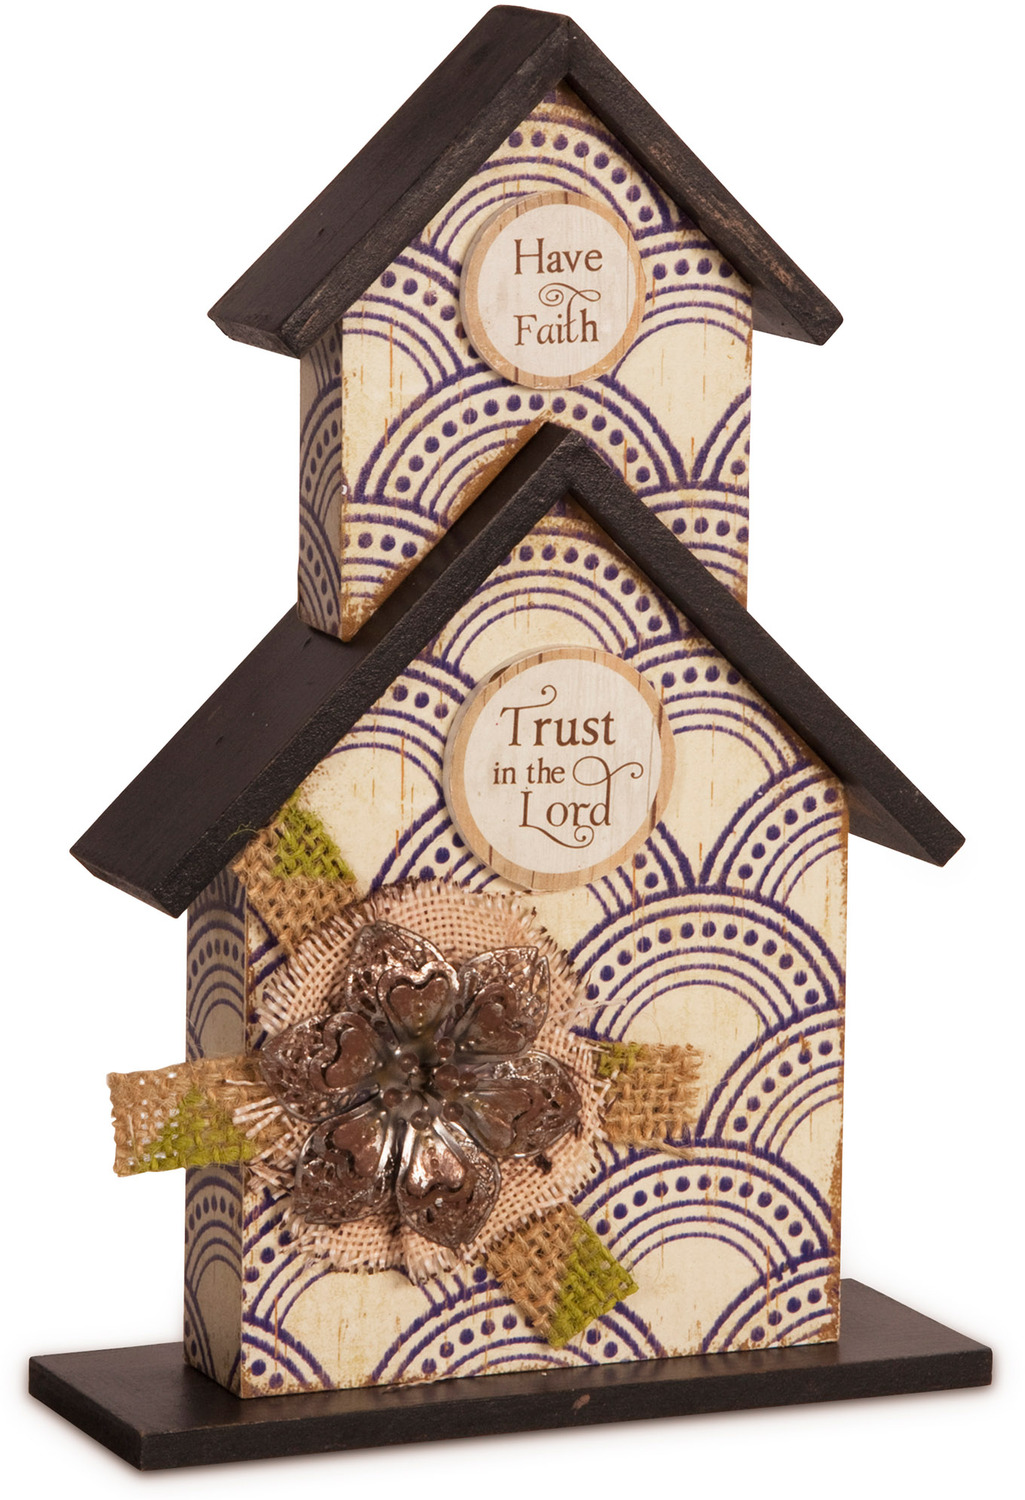 Trust in the Lord by Simple Spirits - Trust in the Lord - 8.5" Birdhouse Plaque 